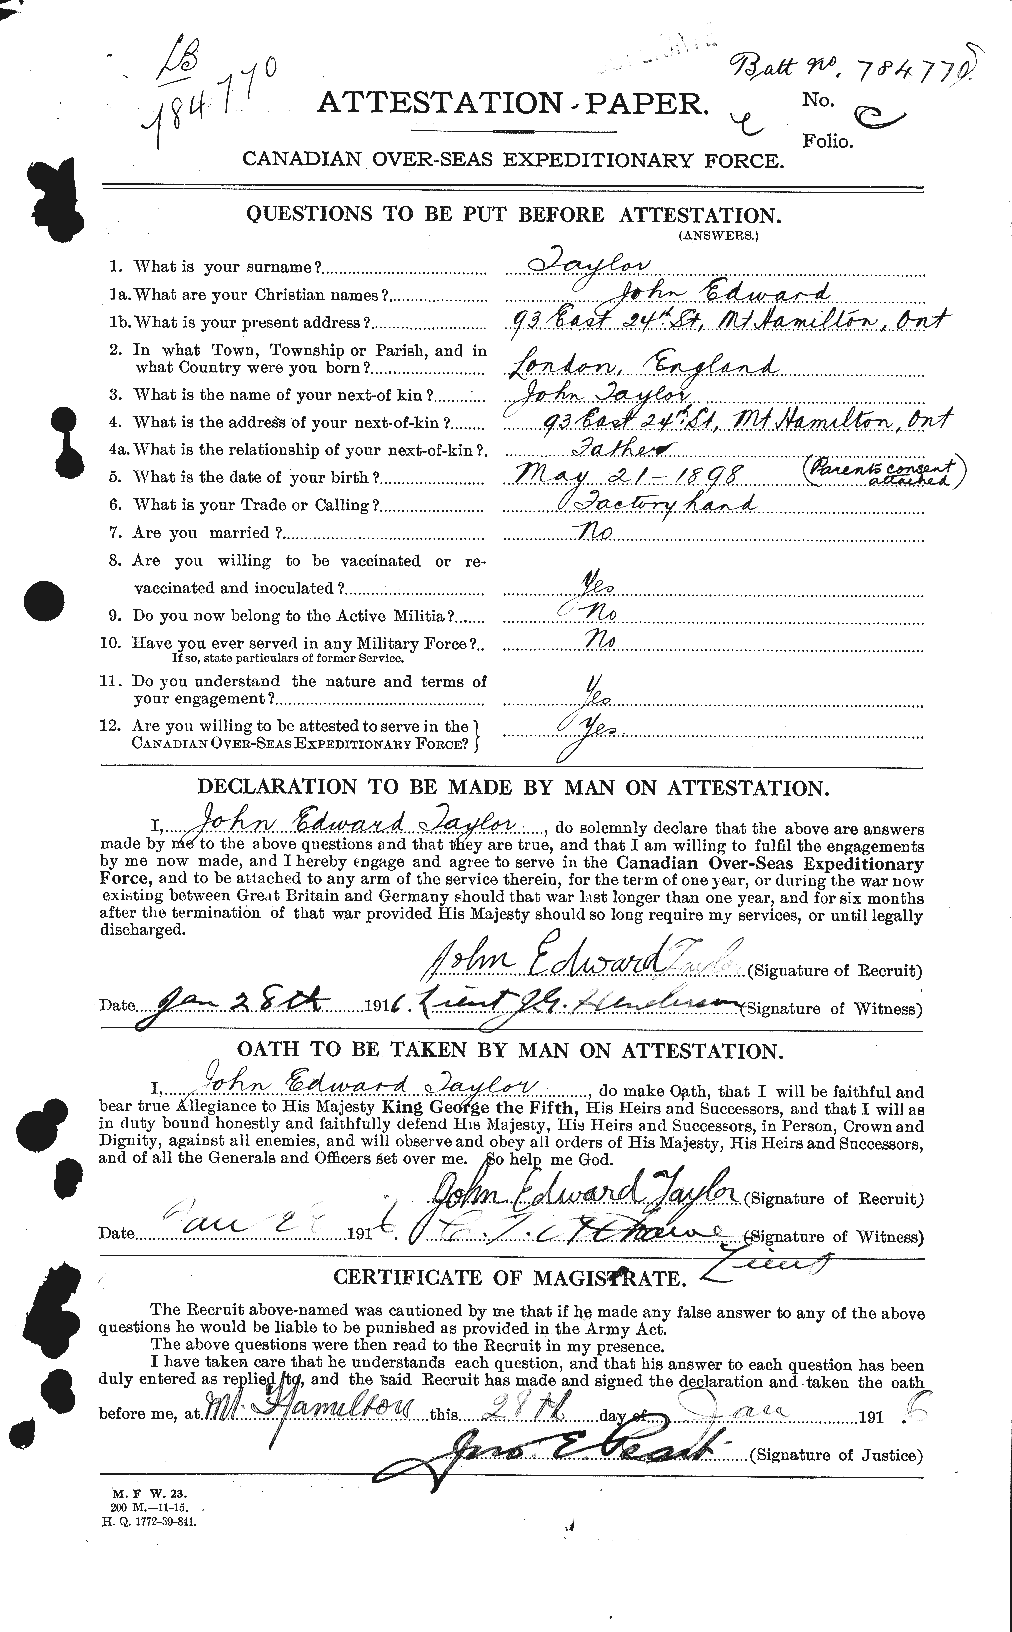 Personnel Records of the First World War - CEF 627077a